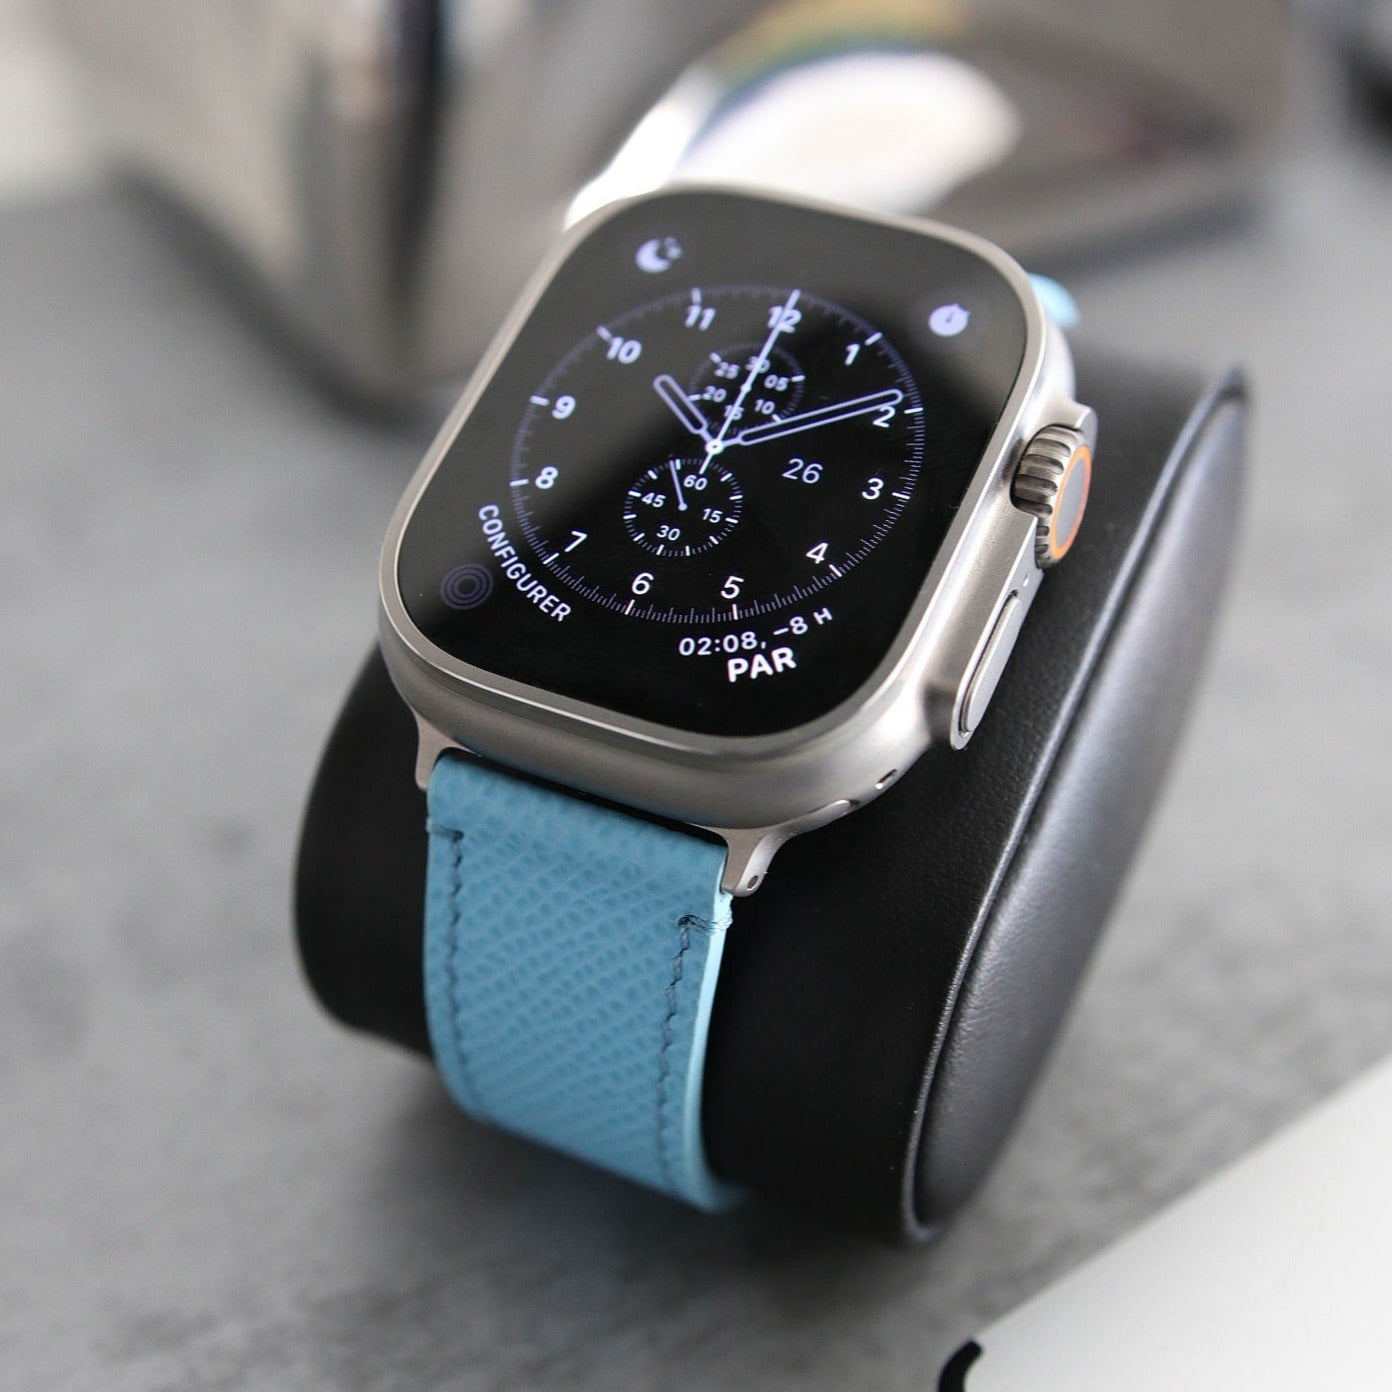 Apple Watch Band - Miami Blue Duo Edition - Elegance Series